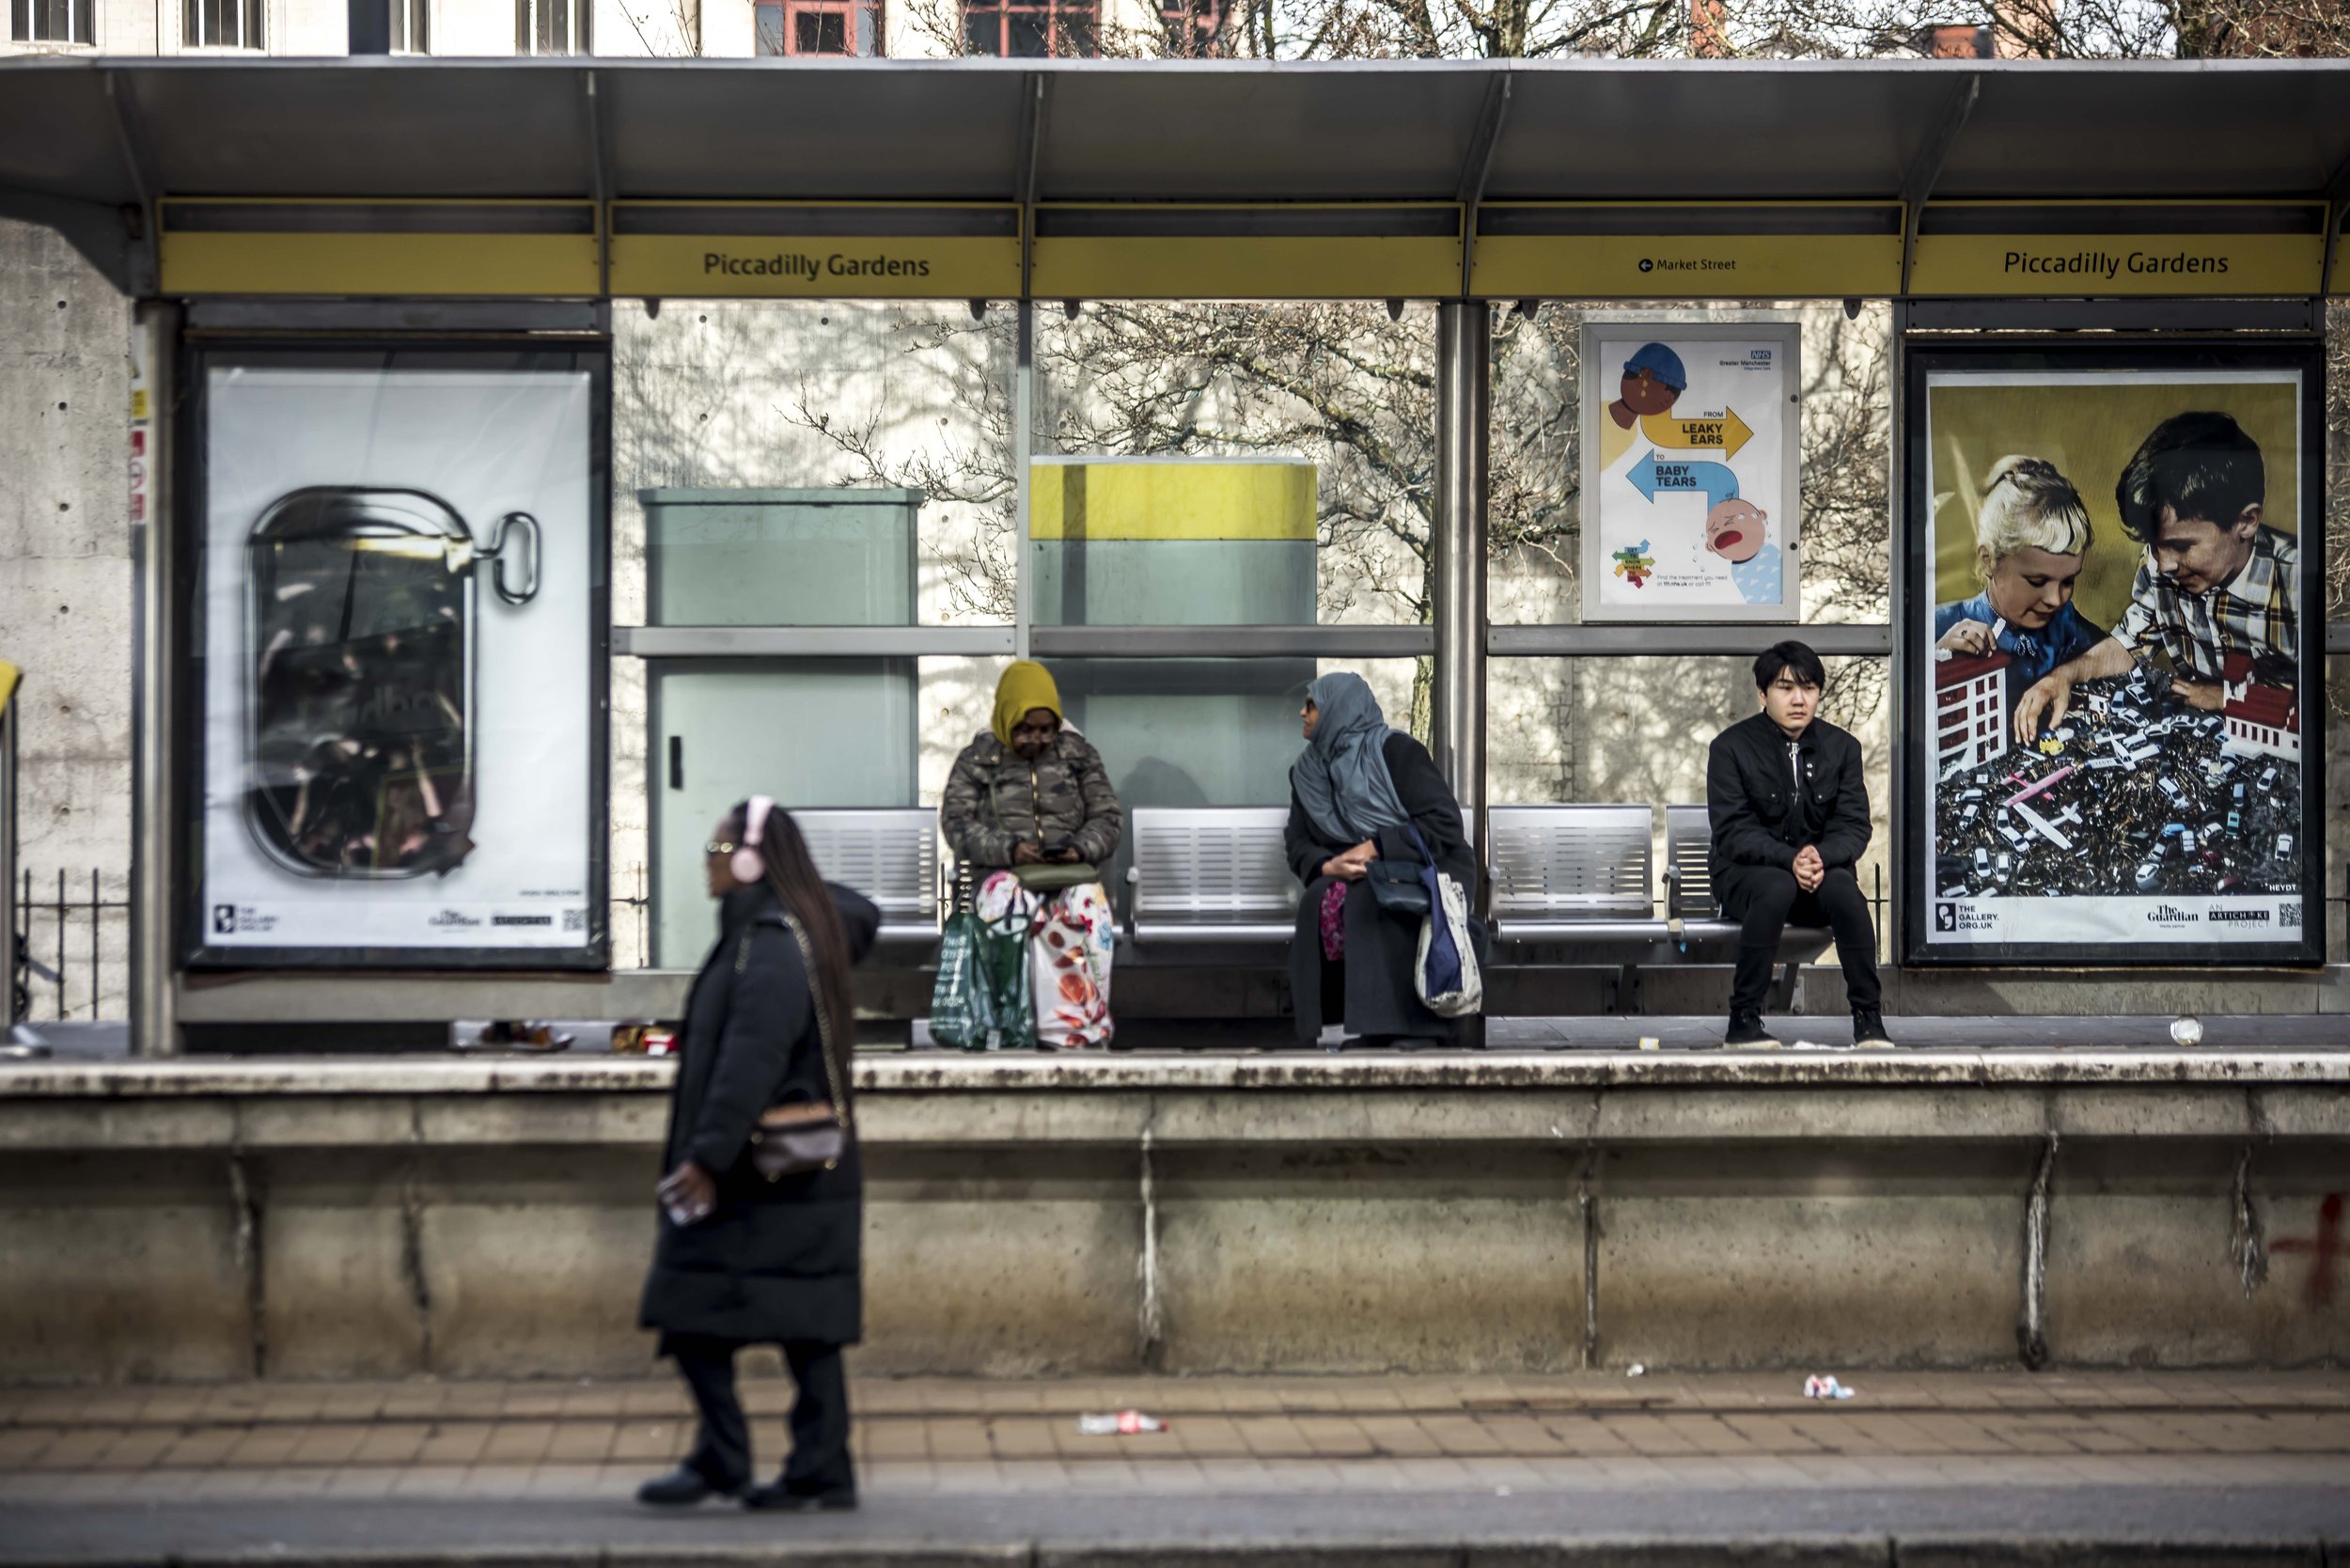 ‘Last to inherit’ (2020) by HEYDT and Forced into a ‘TickBox’ (2023) by Hugh Malyon. The Gallery, Season 2, 2023. Produced by Artichoke. Photo by Chris Payne. Piccadilly Gardens Metro, Manchester. Landscape 1.jpg